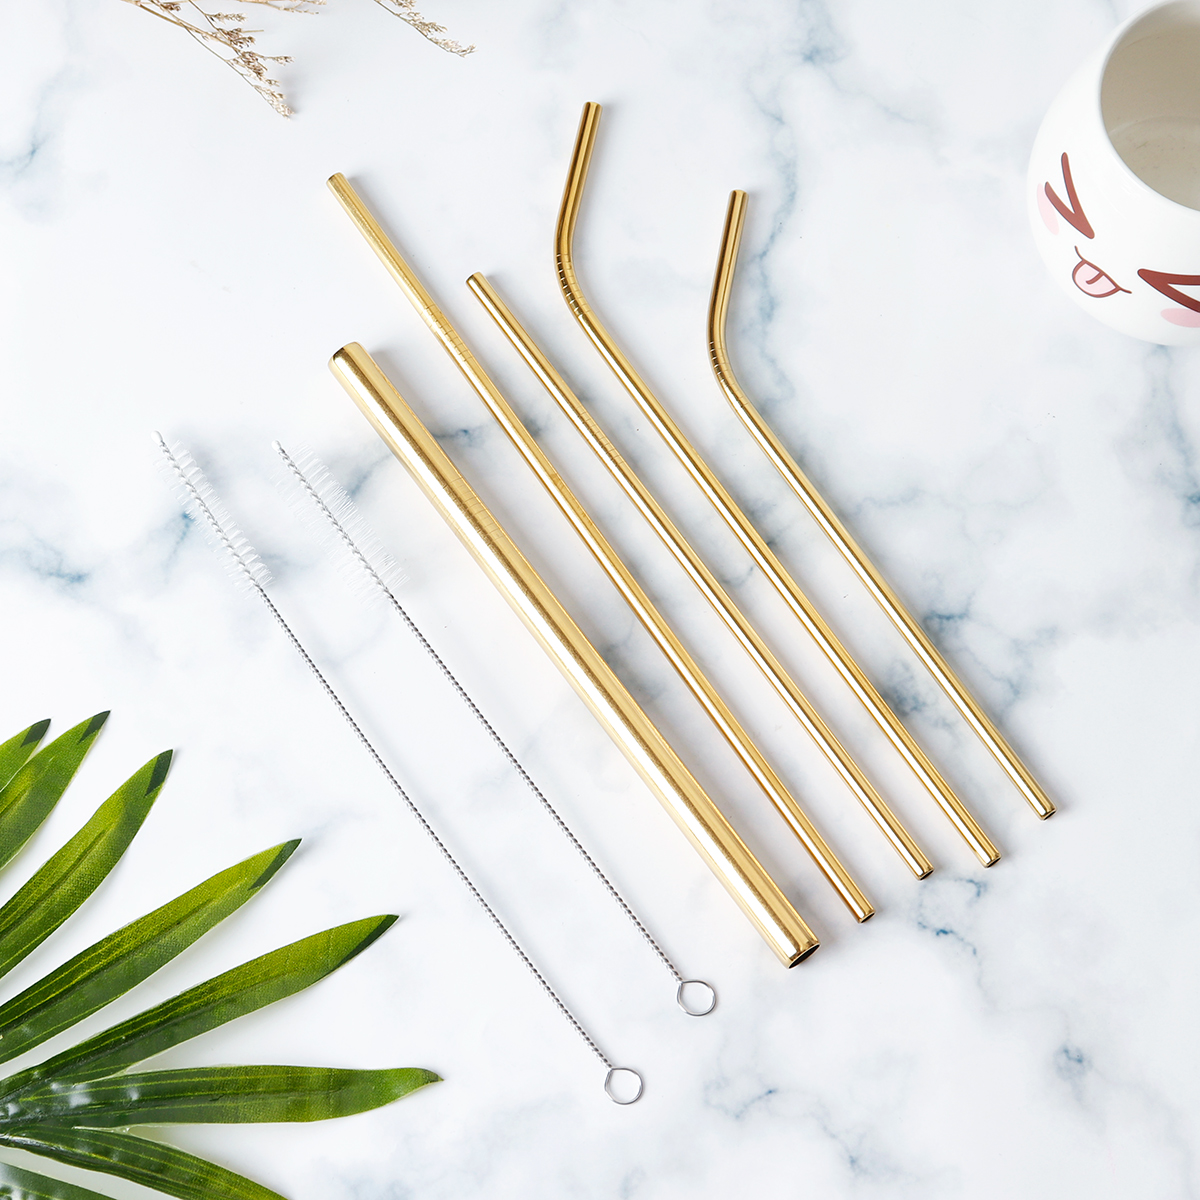 Portable-Metal-Straw-Set-304-Stainless-Steel-Straws-Reusable-Metal-Drinking-Straws-With-Cleaning-Bru-1532046-6